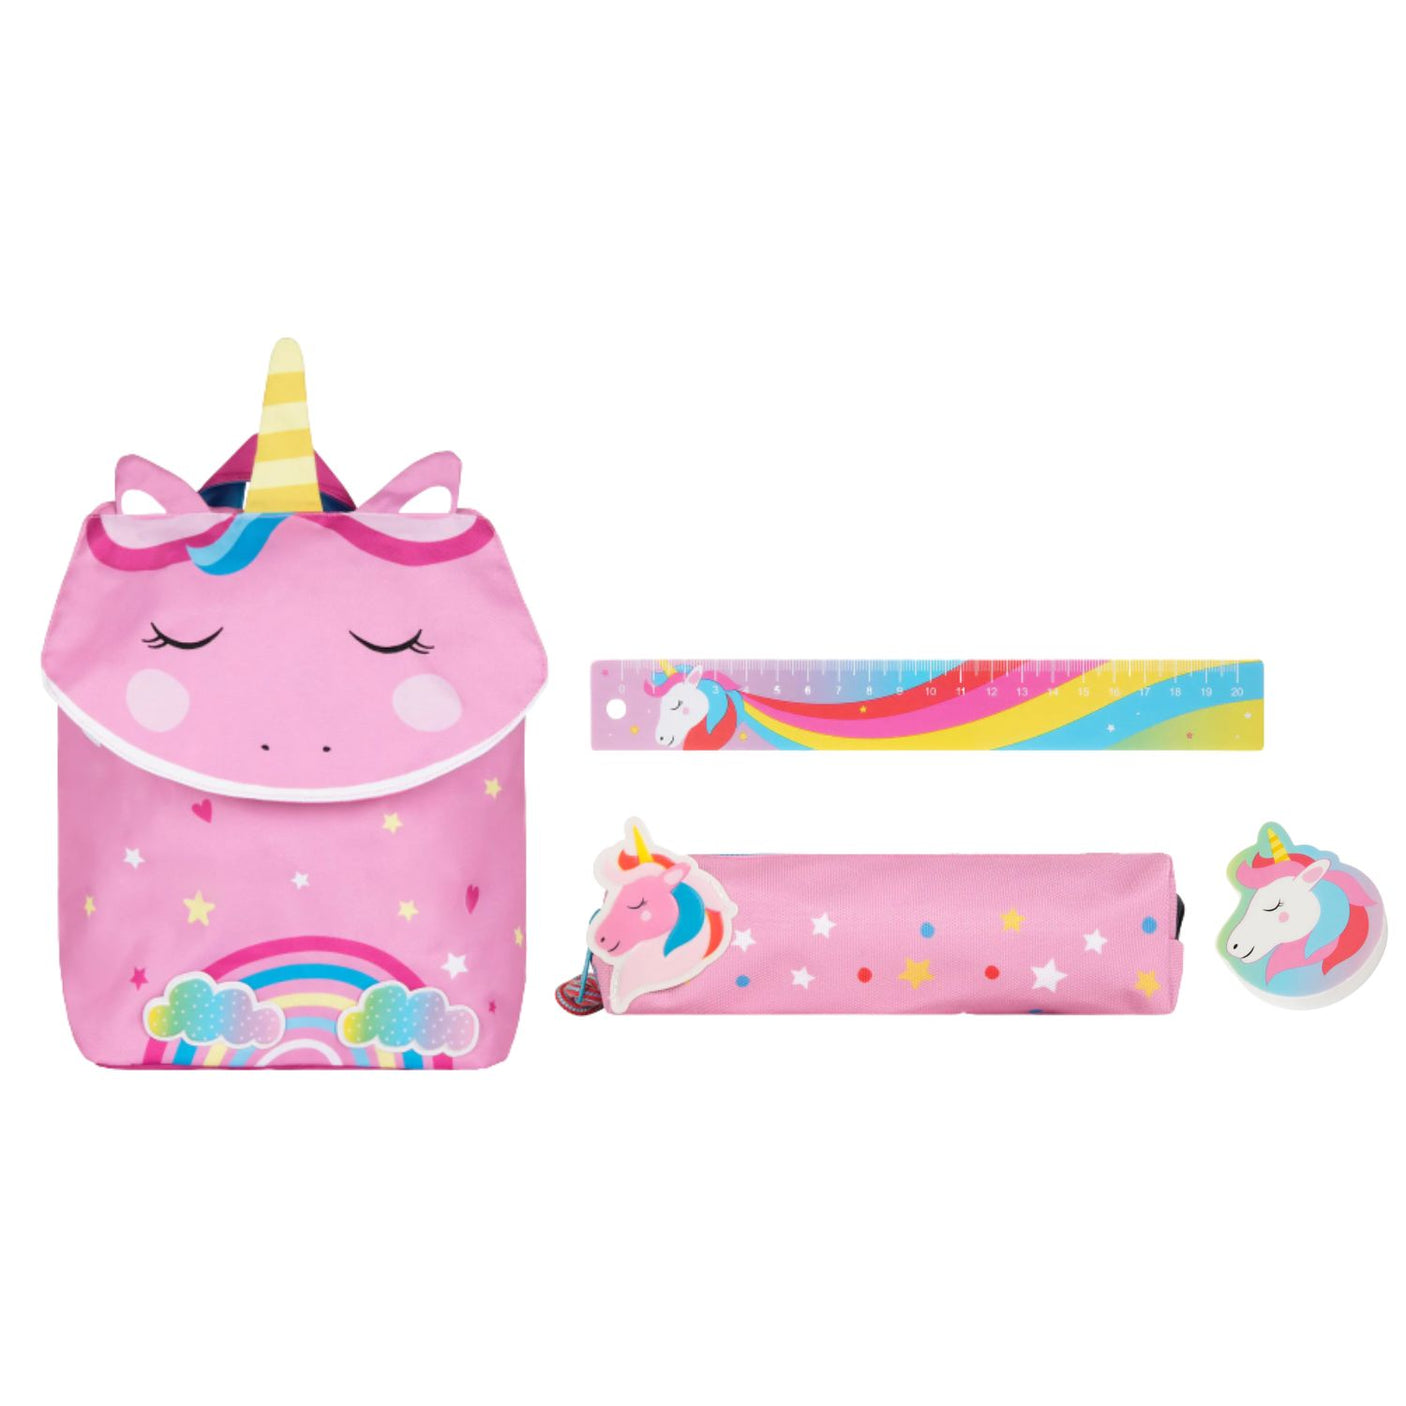 Unicorn Back to School Kit: Backpack and Accessories: Pencil Case, Water Bottle, Soft Ruler and Maxi Eraser